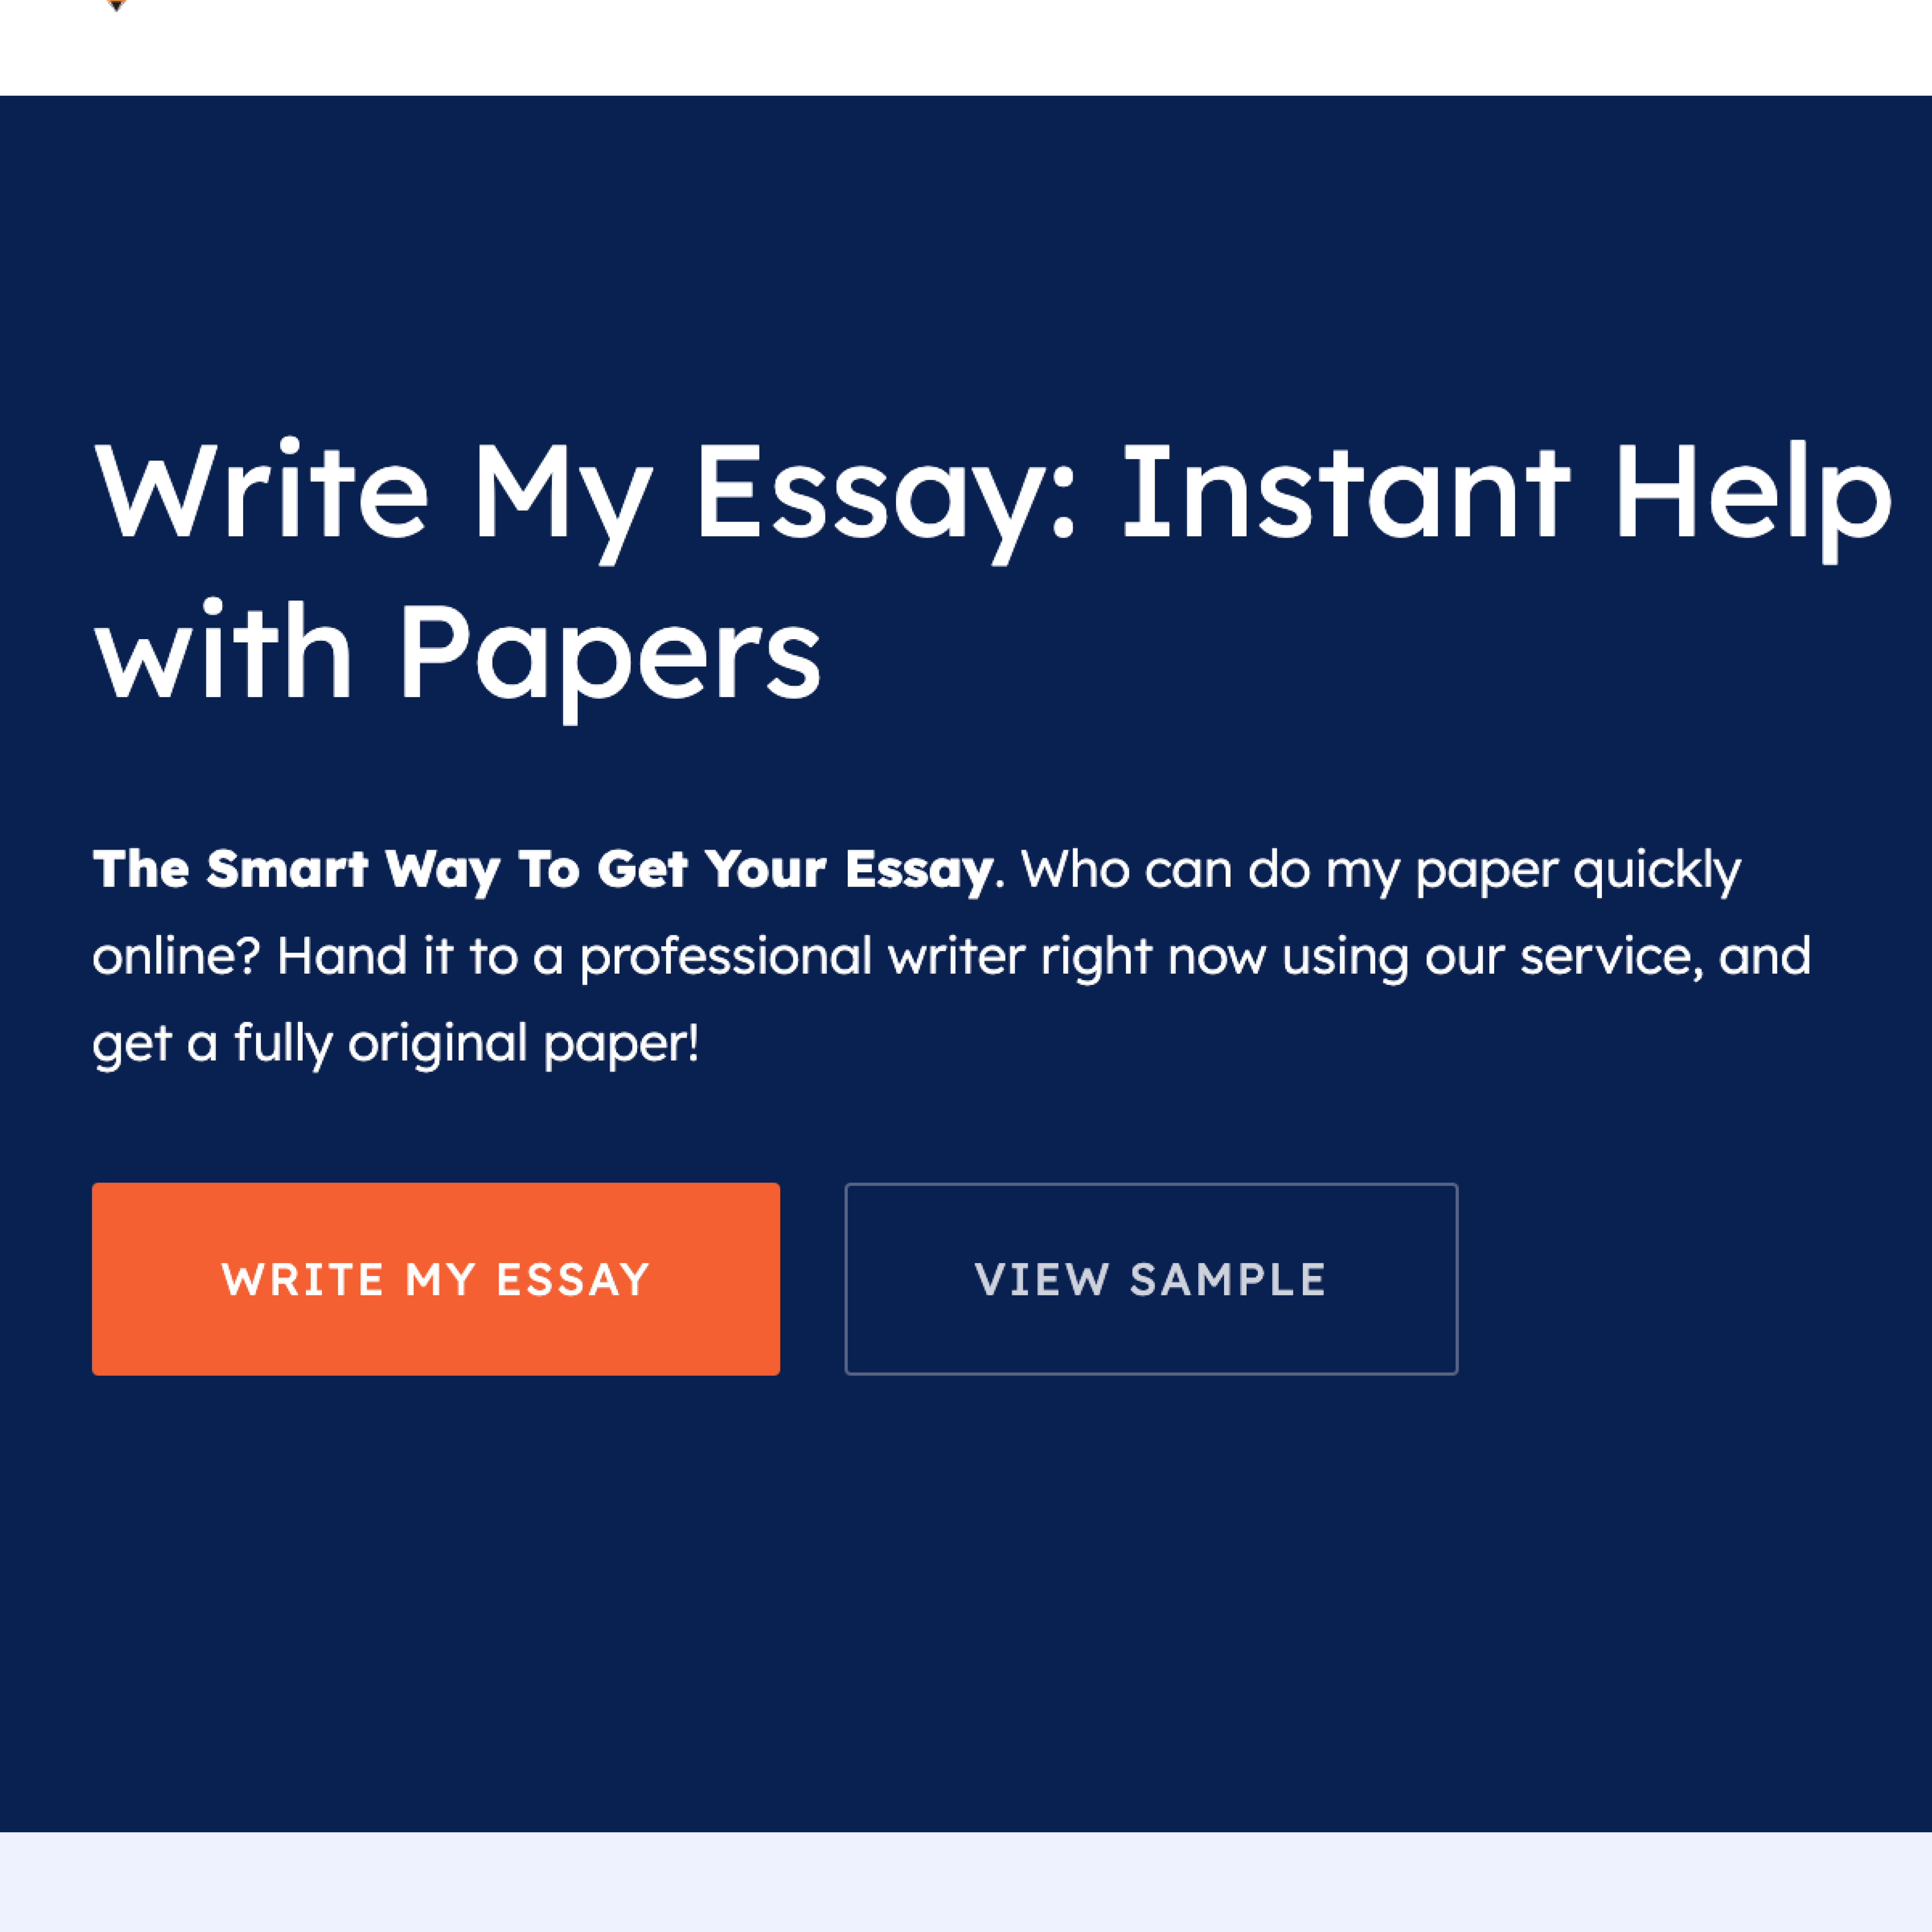 5 Problems Everyone Has With essay – How To Solved Them